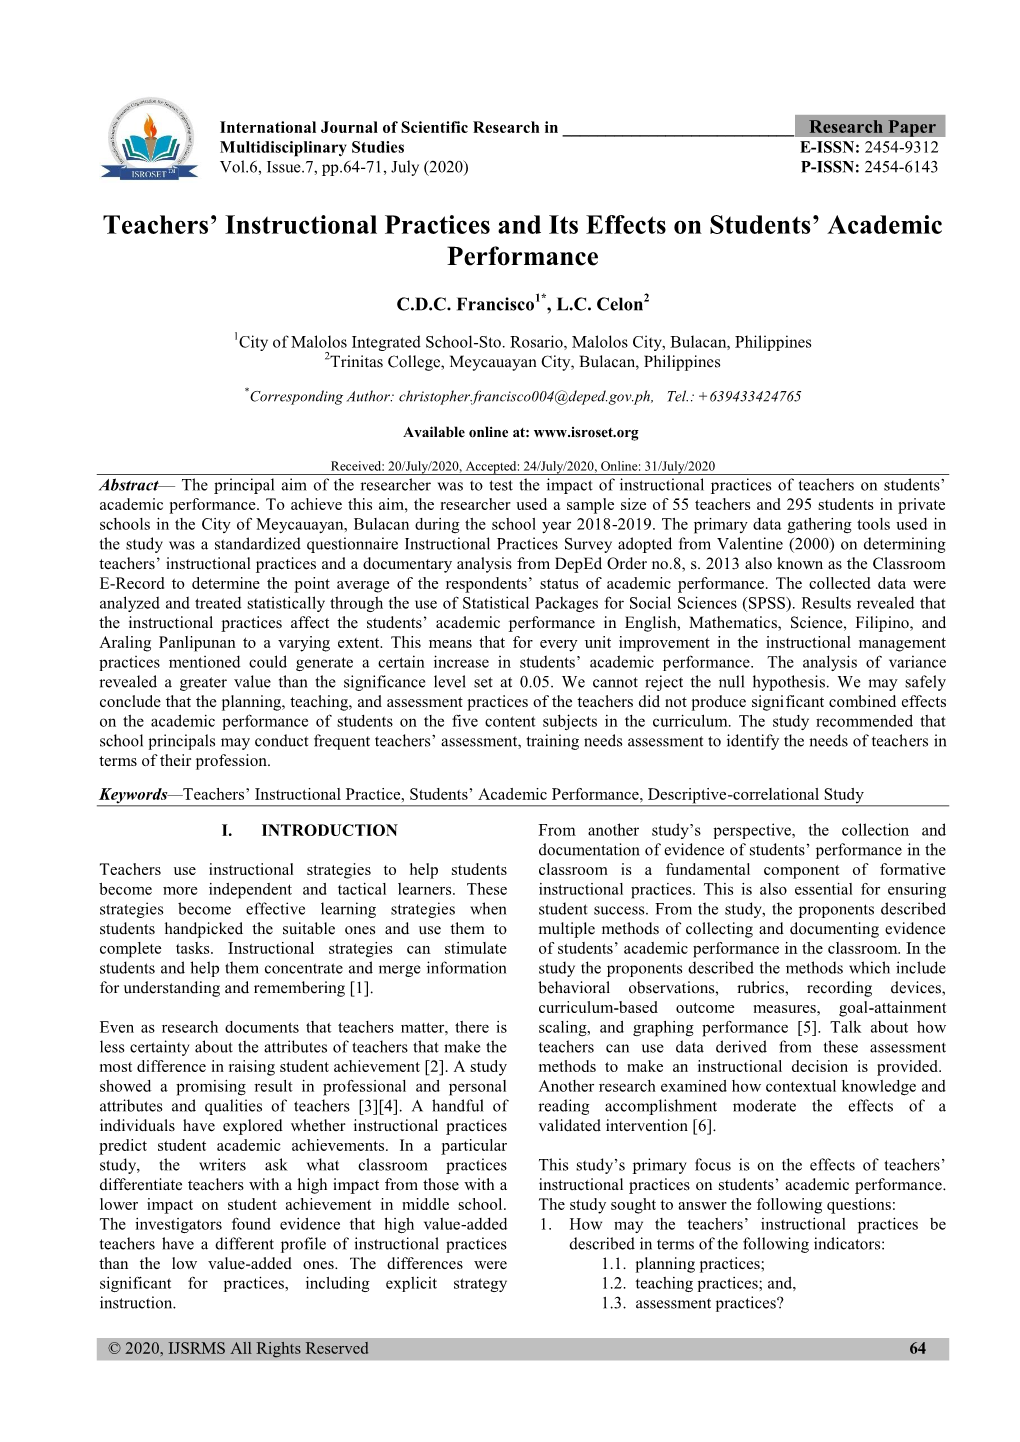 Teachers' Instructional Practices and Its Effects on Students